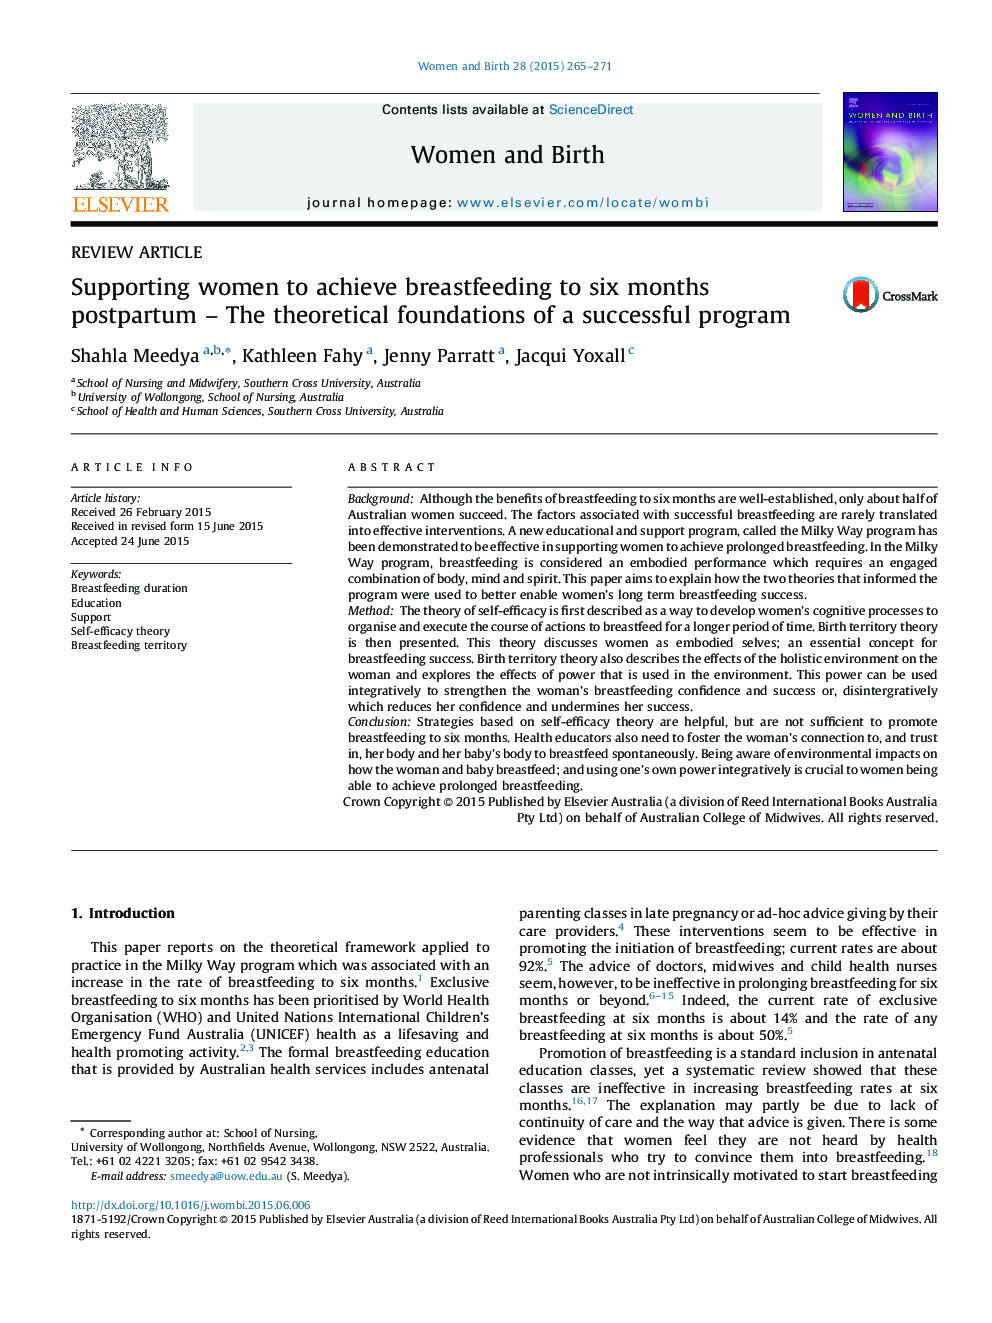 Supporting women to achieve breastfeeding to six months postpartum – The theoretical foundations of a successful program